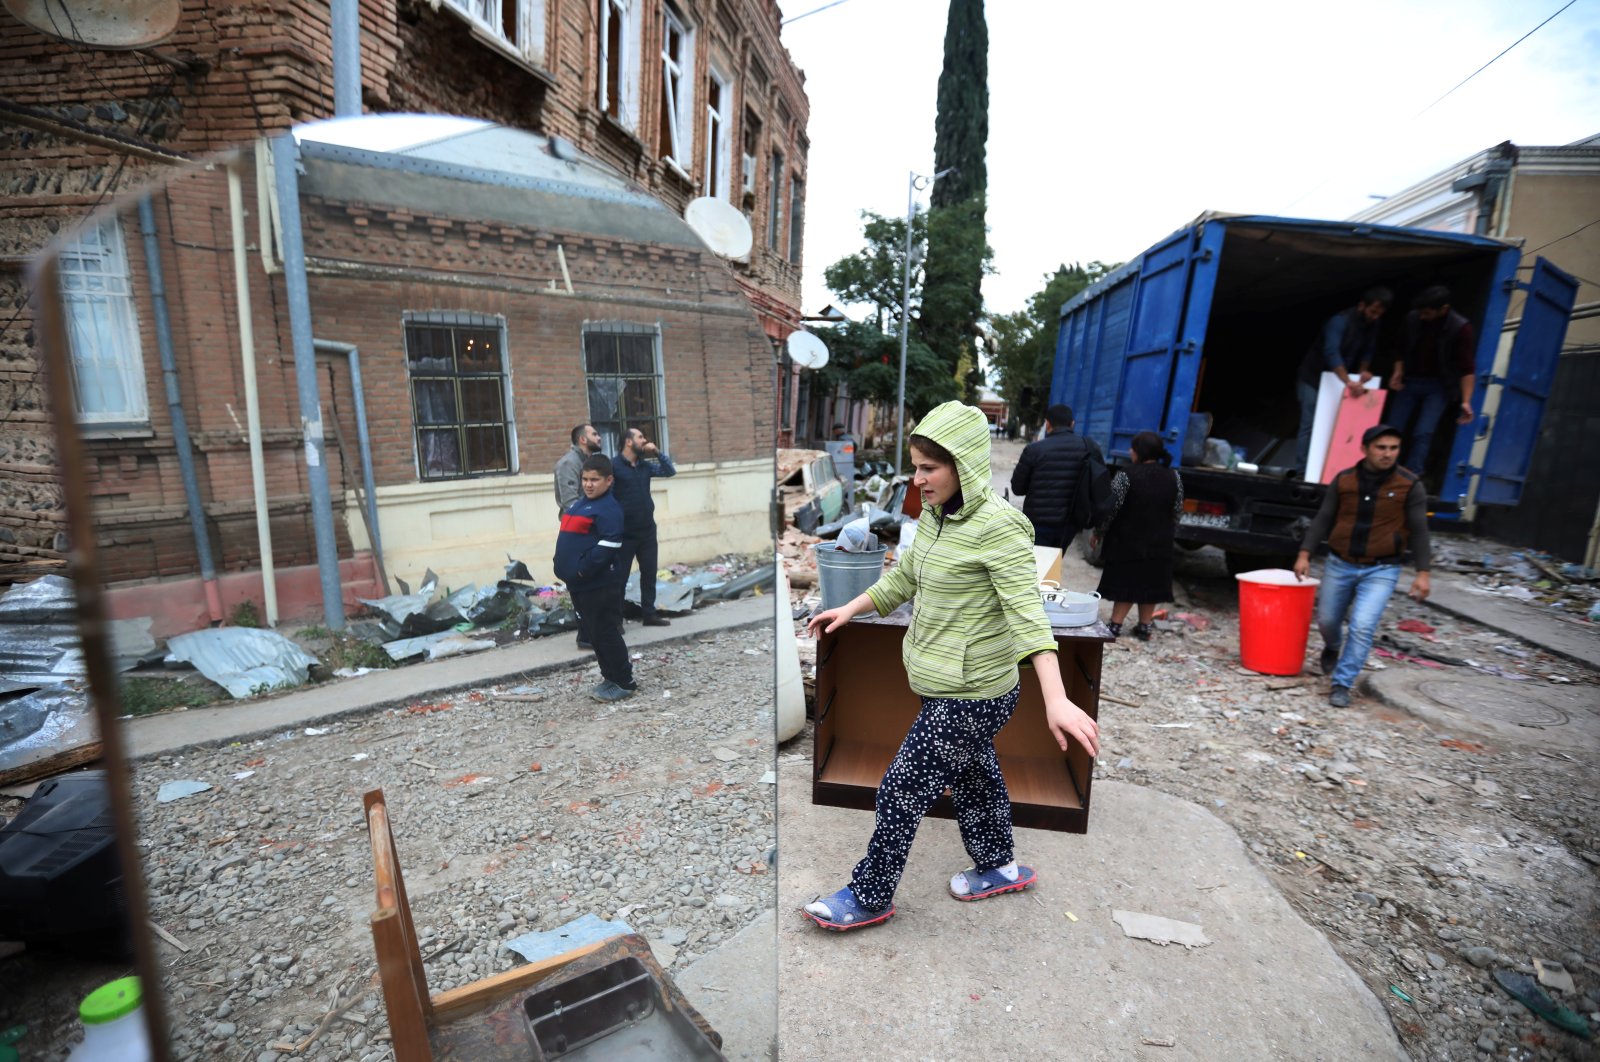 People load belongings into a truck next to a house damaged by Armenian shelling during a military conflict over Armenian-occupied Nagorno-Karabakh, in the city of Ganja, Azerbaijan, Oct. 6, 2020. (Reuters Photo)